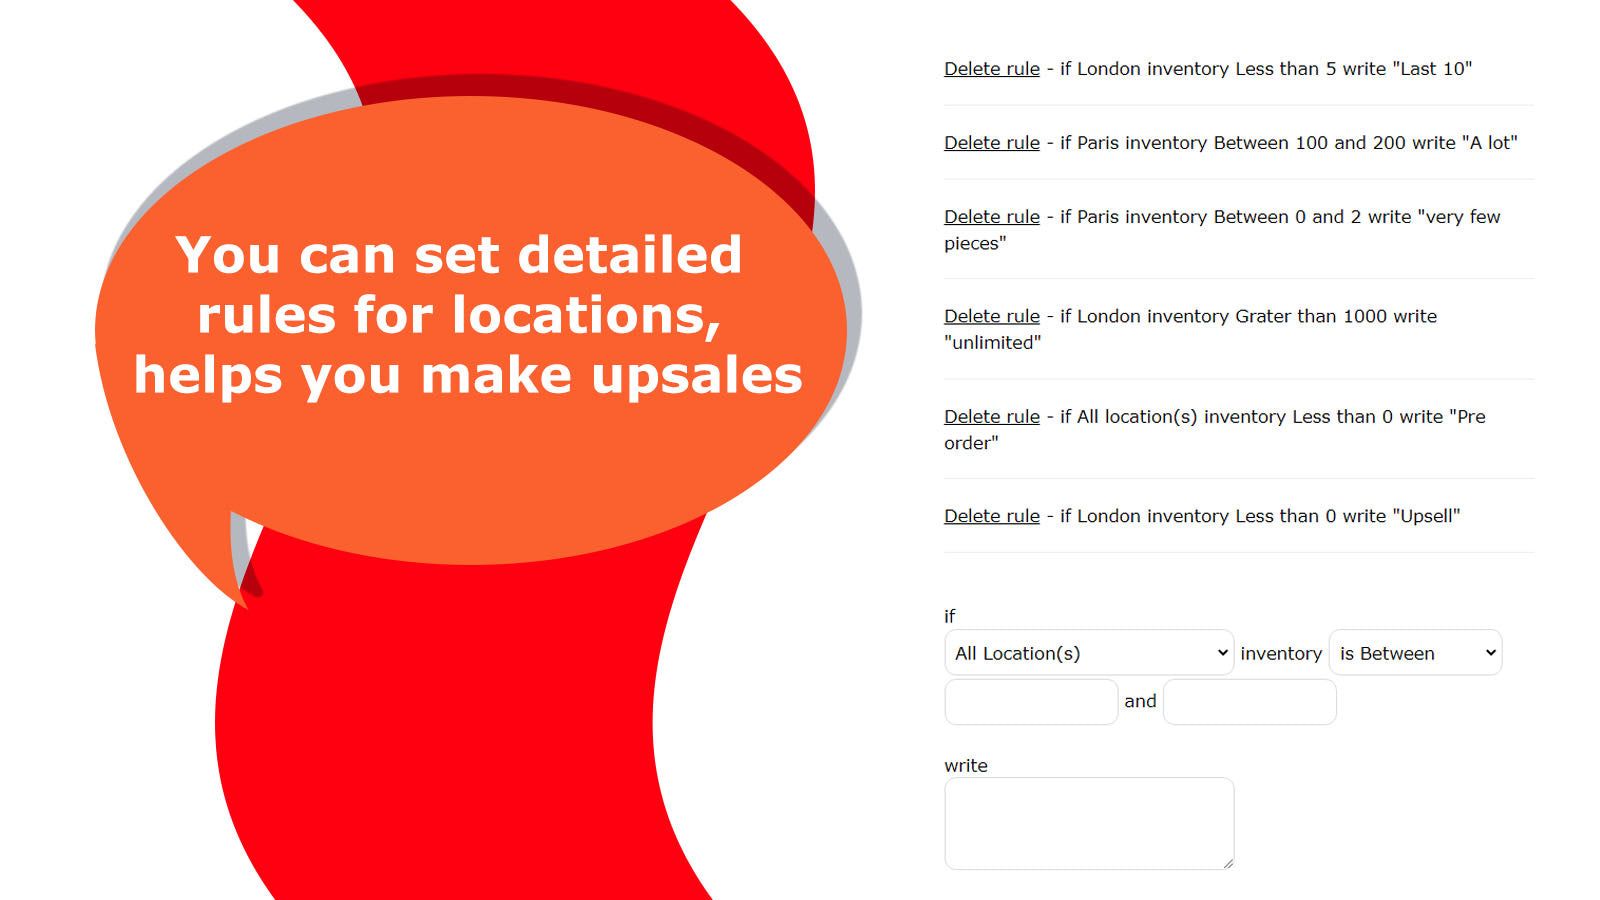 You can set detailed rules for locations, helps you make upsales